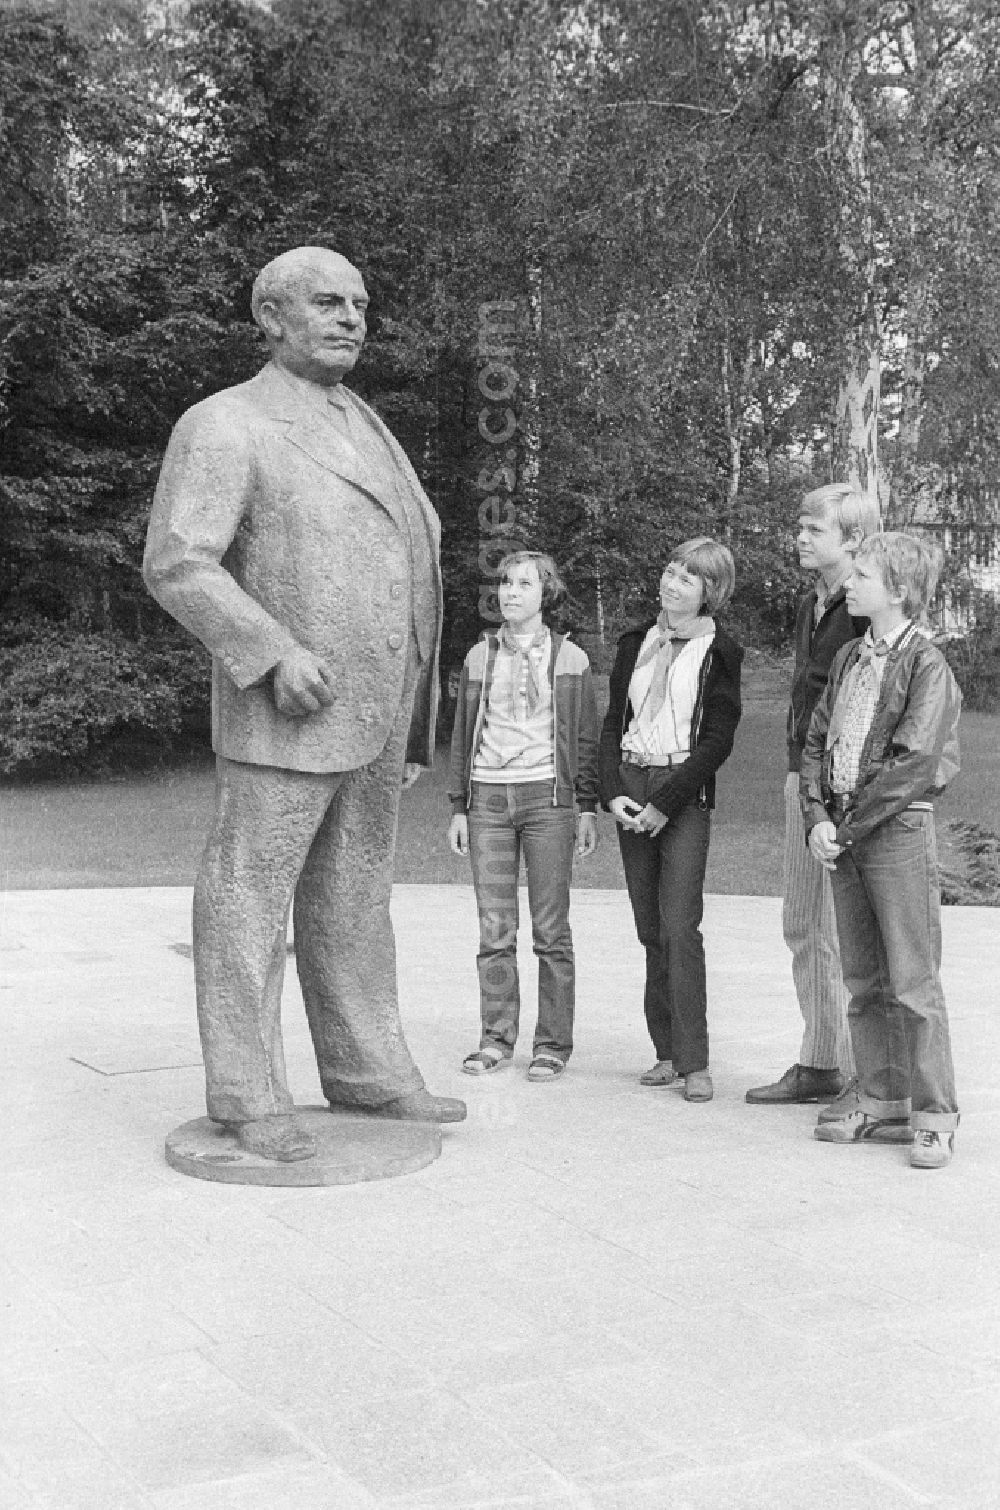 GDR picture archive: Joachimsthal - Willhelm Pieck monument at the entrance of the pioneer's republic Wilhelm Pieck in the Werbellin lake in Joachimsthal in the federal state Brandenburg in the area of the former GDR, German democratic republic